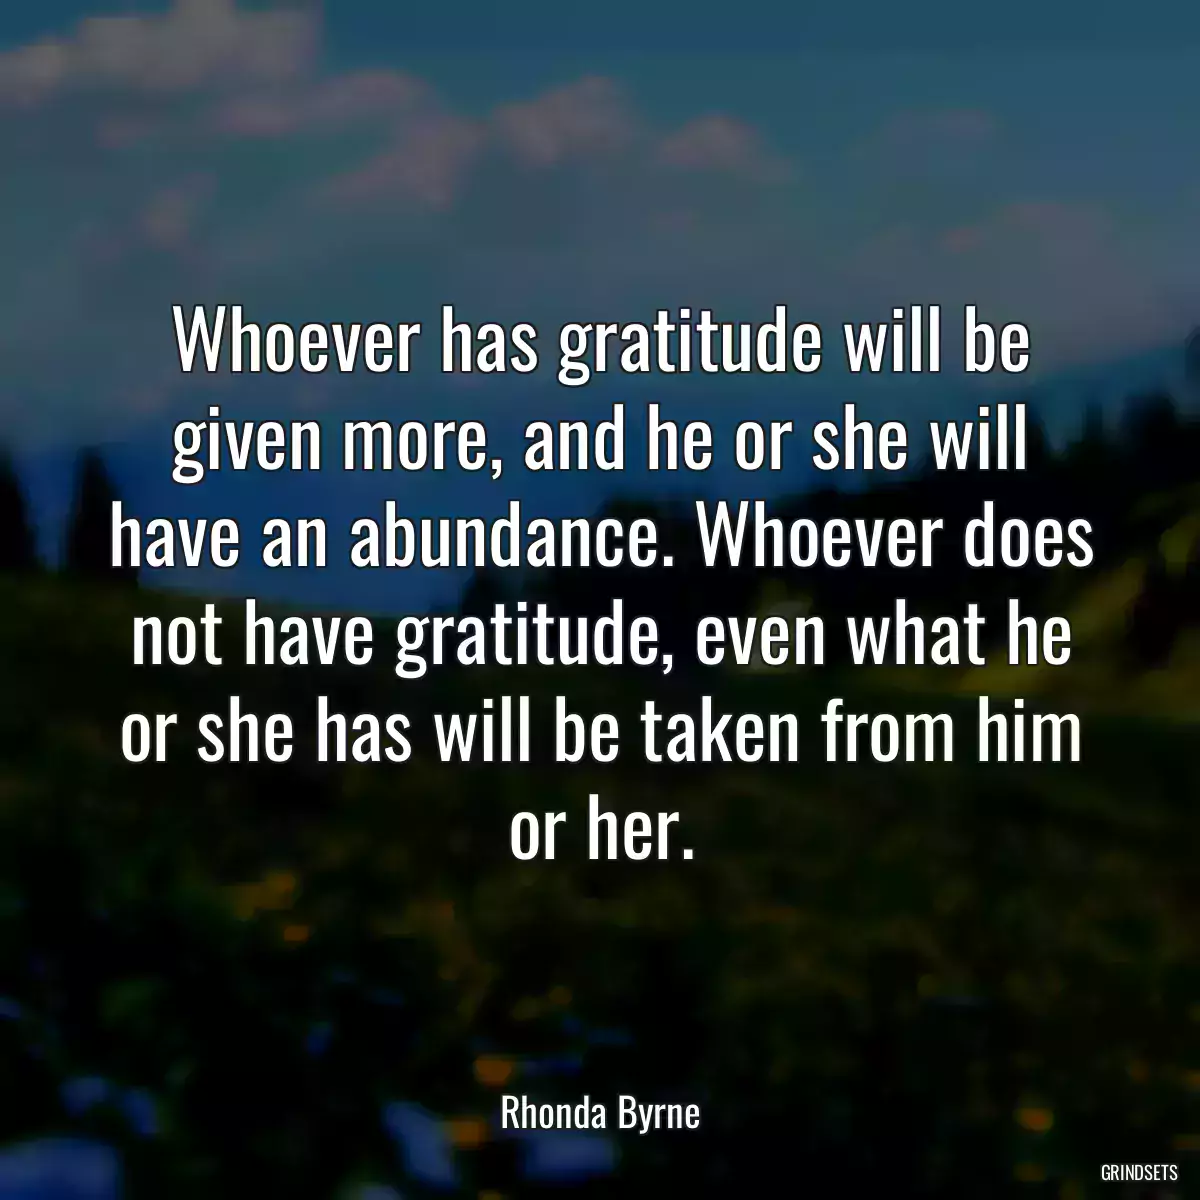 Whoever has gratitude will be given more, and he or she will have an abundance. Whoever does not have gratitude, even what he or she has will be taken from him or her.